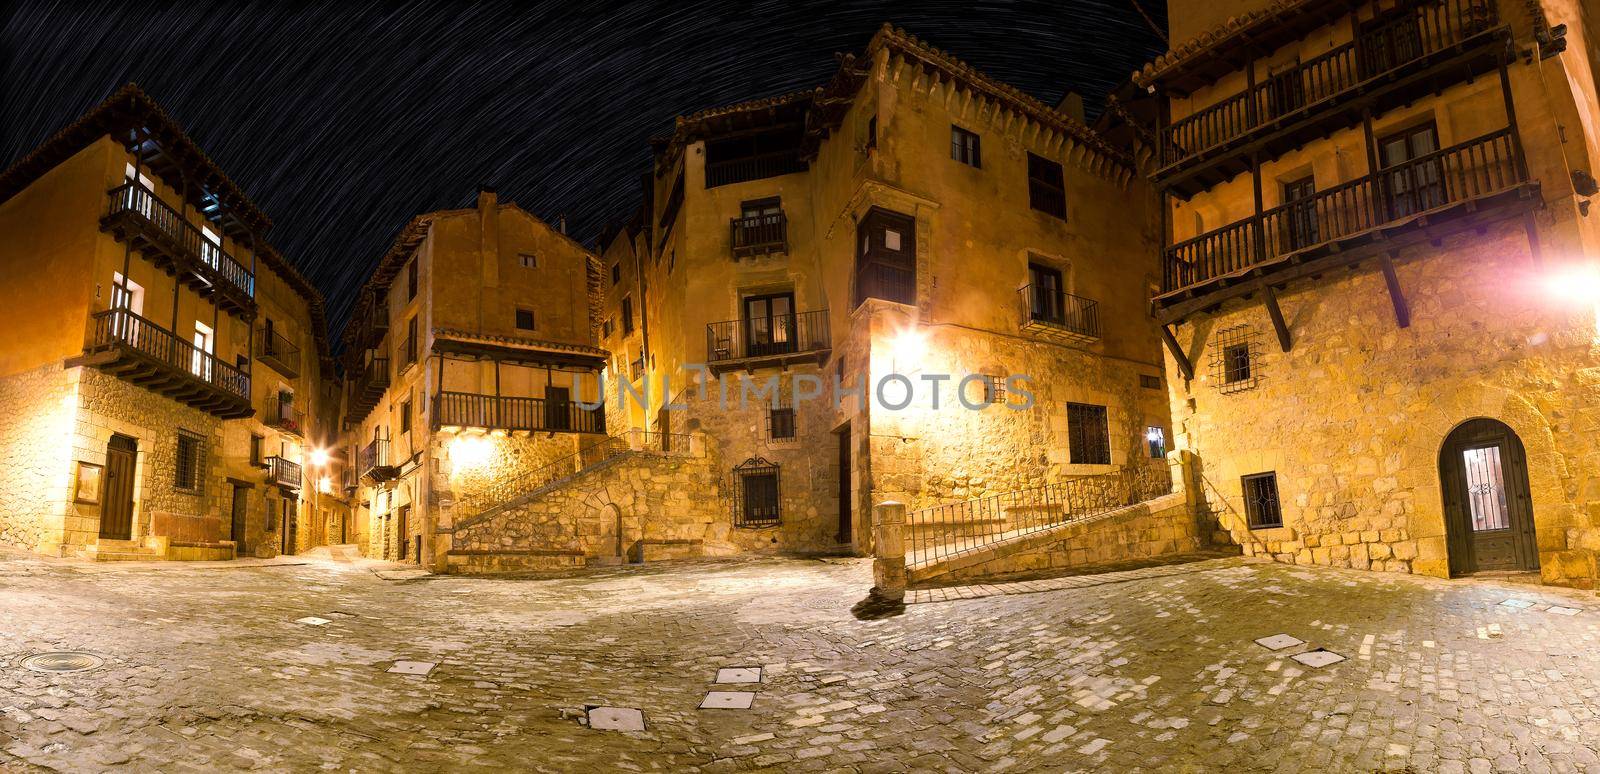 Spanish village.Stone architecture and pebble street.Famous square